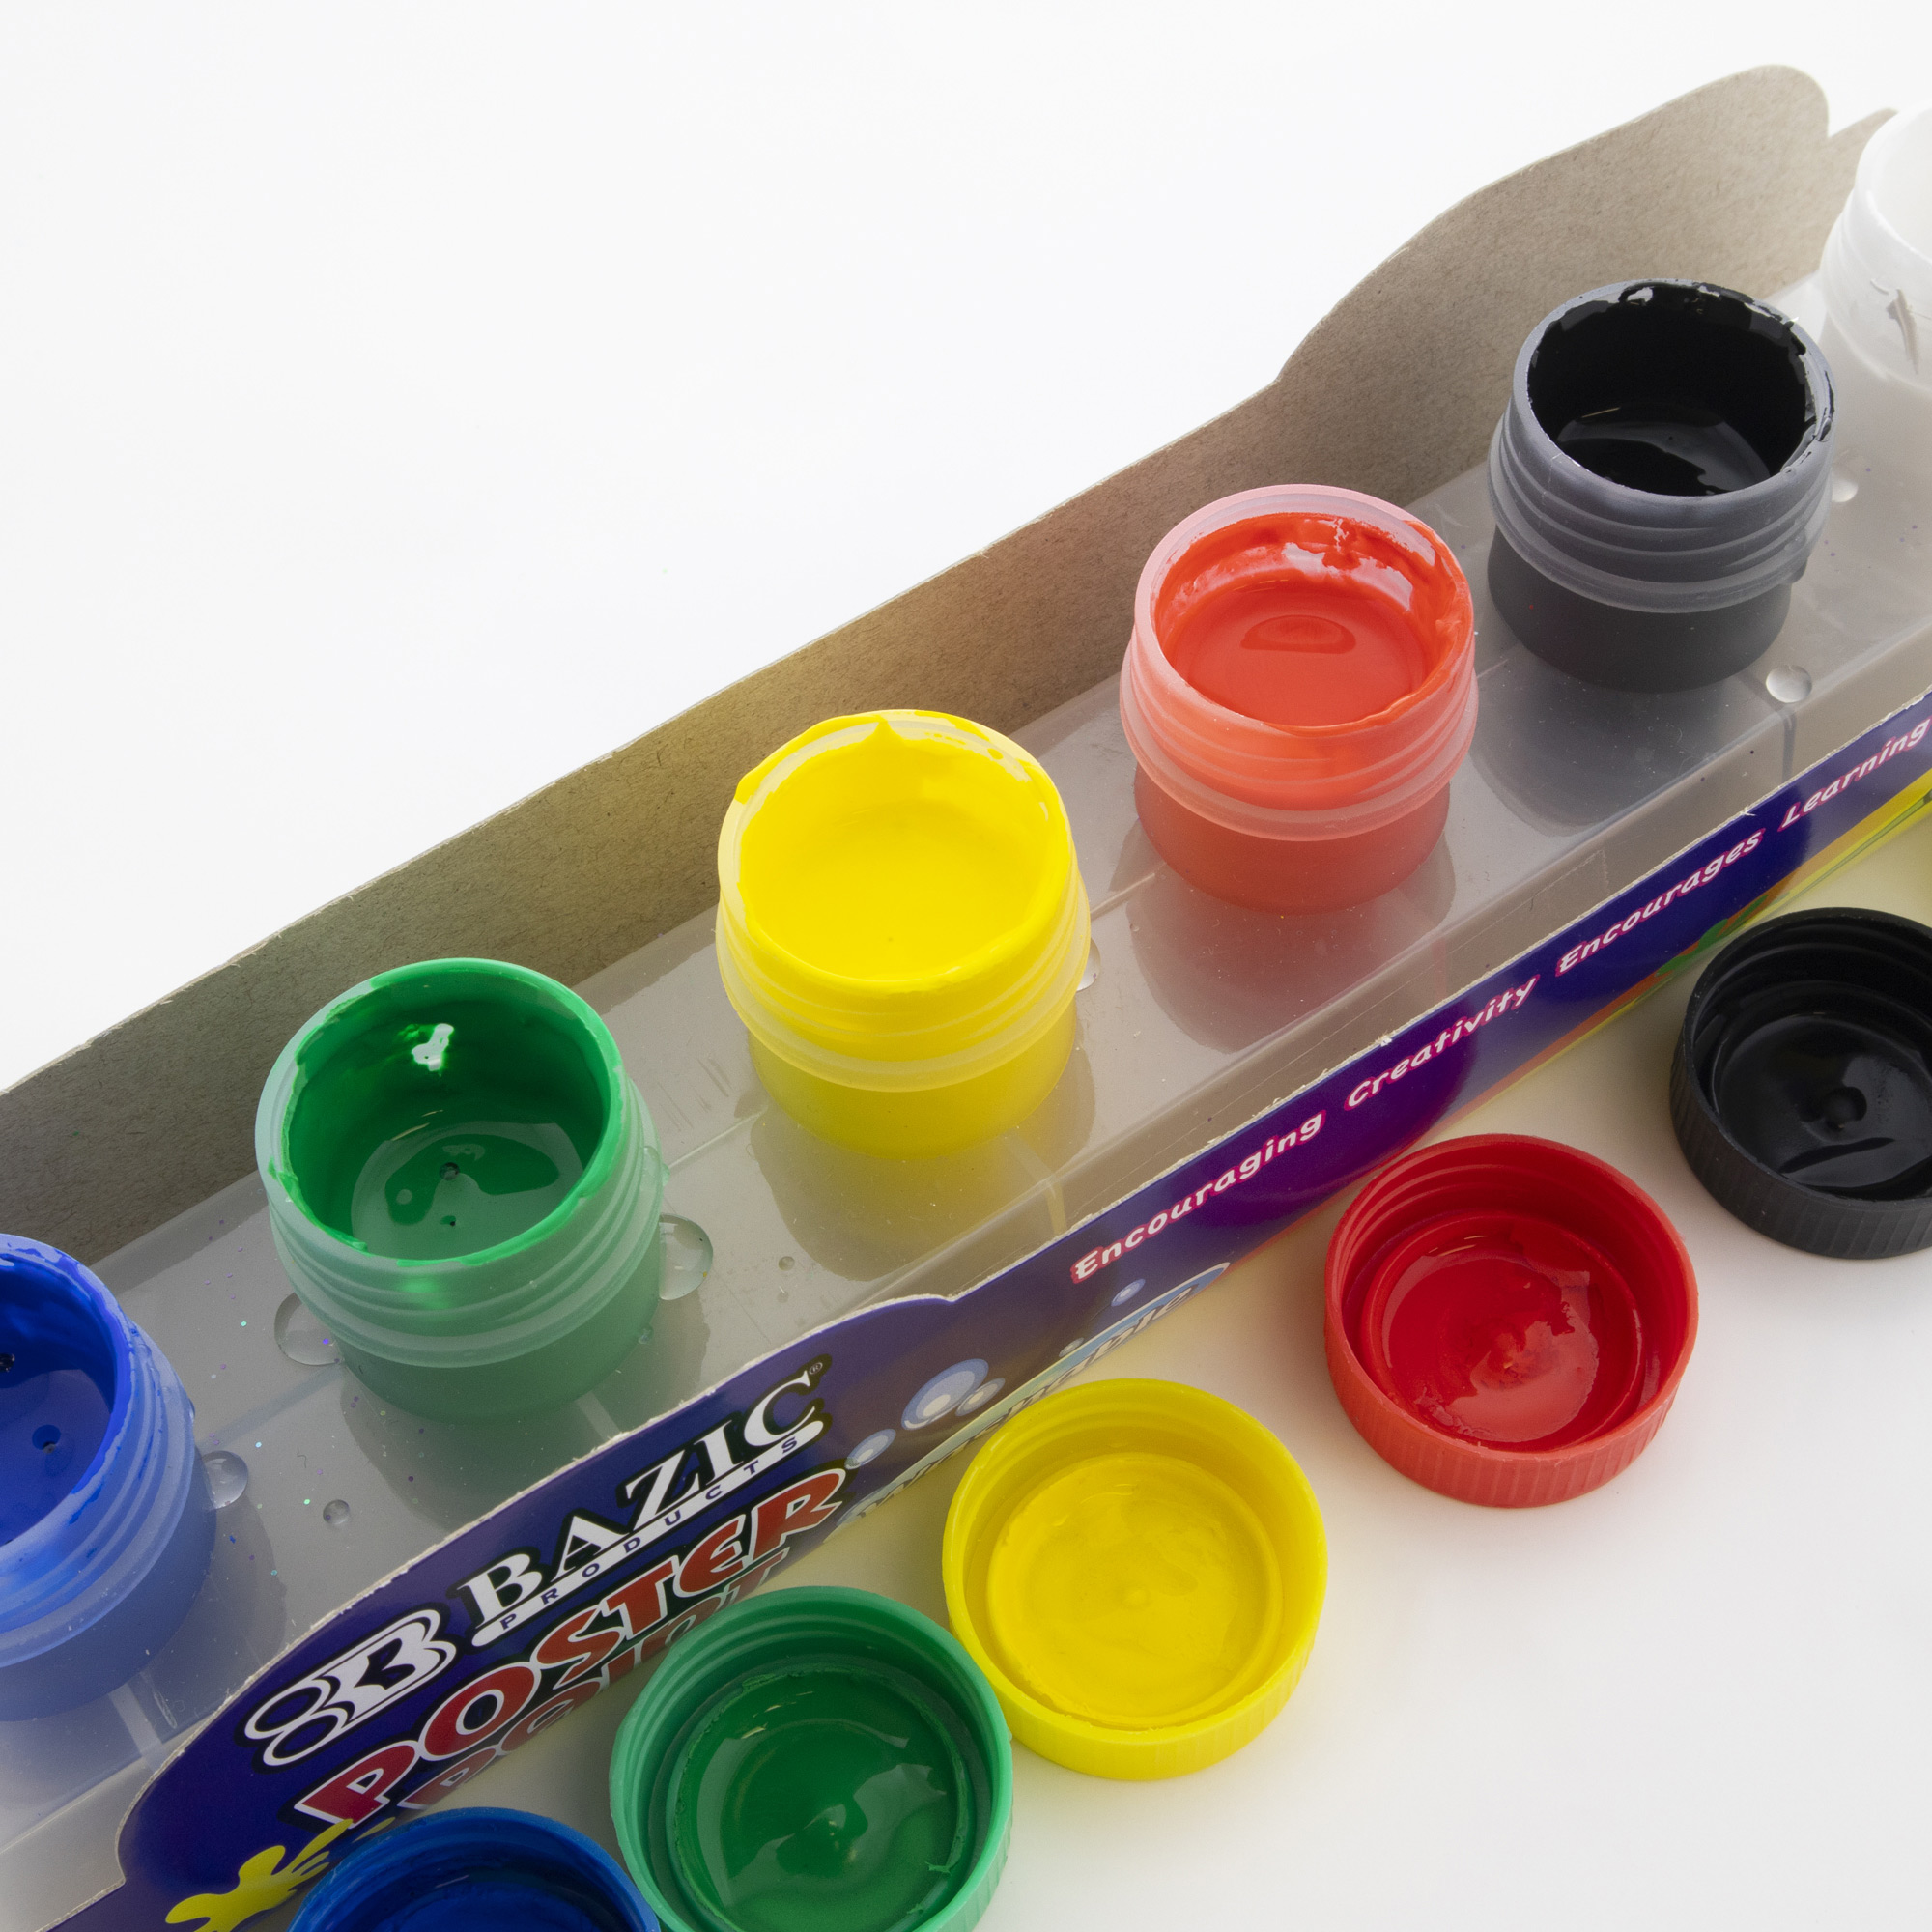 BAZIC 0.75 FL OZ (22.2 mL) 6 Color Washable Poster Paint w/ Brush Bazic  Products